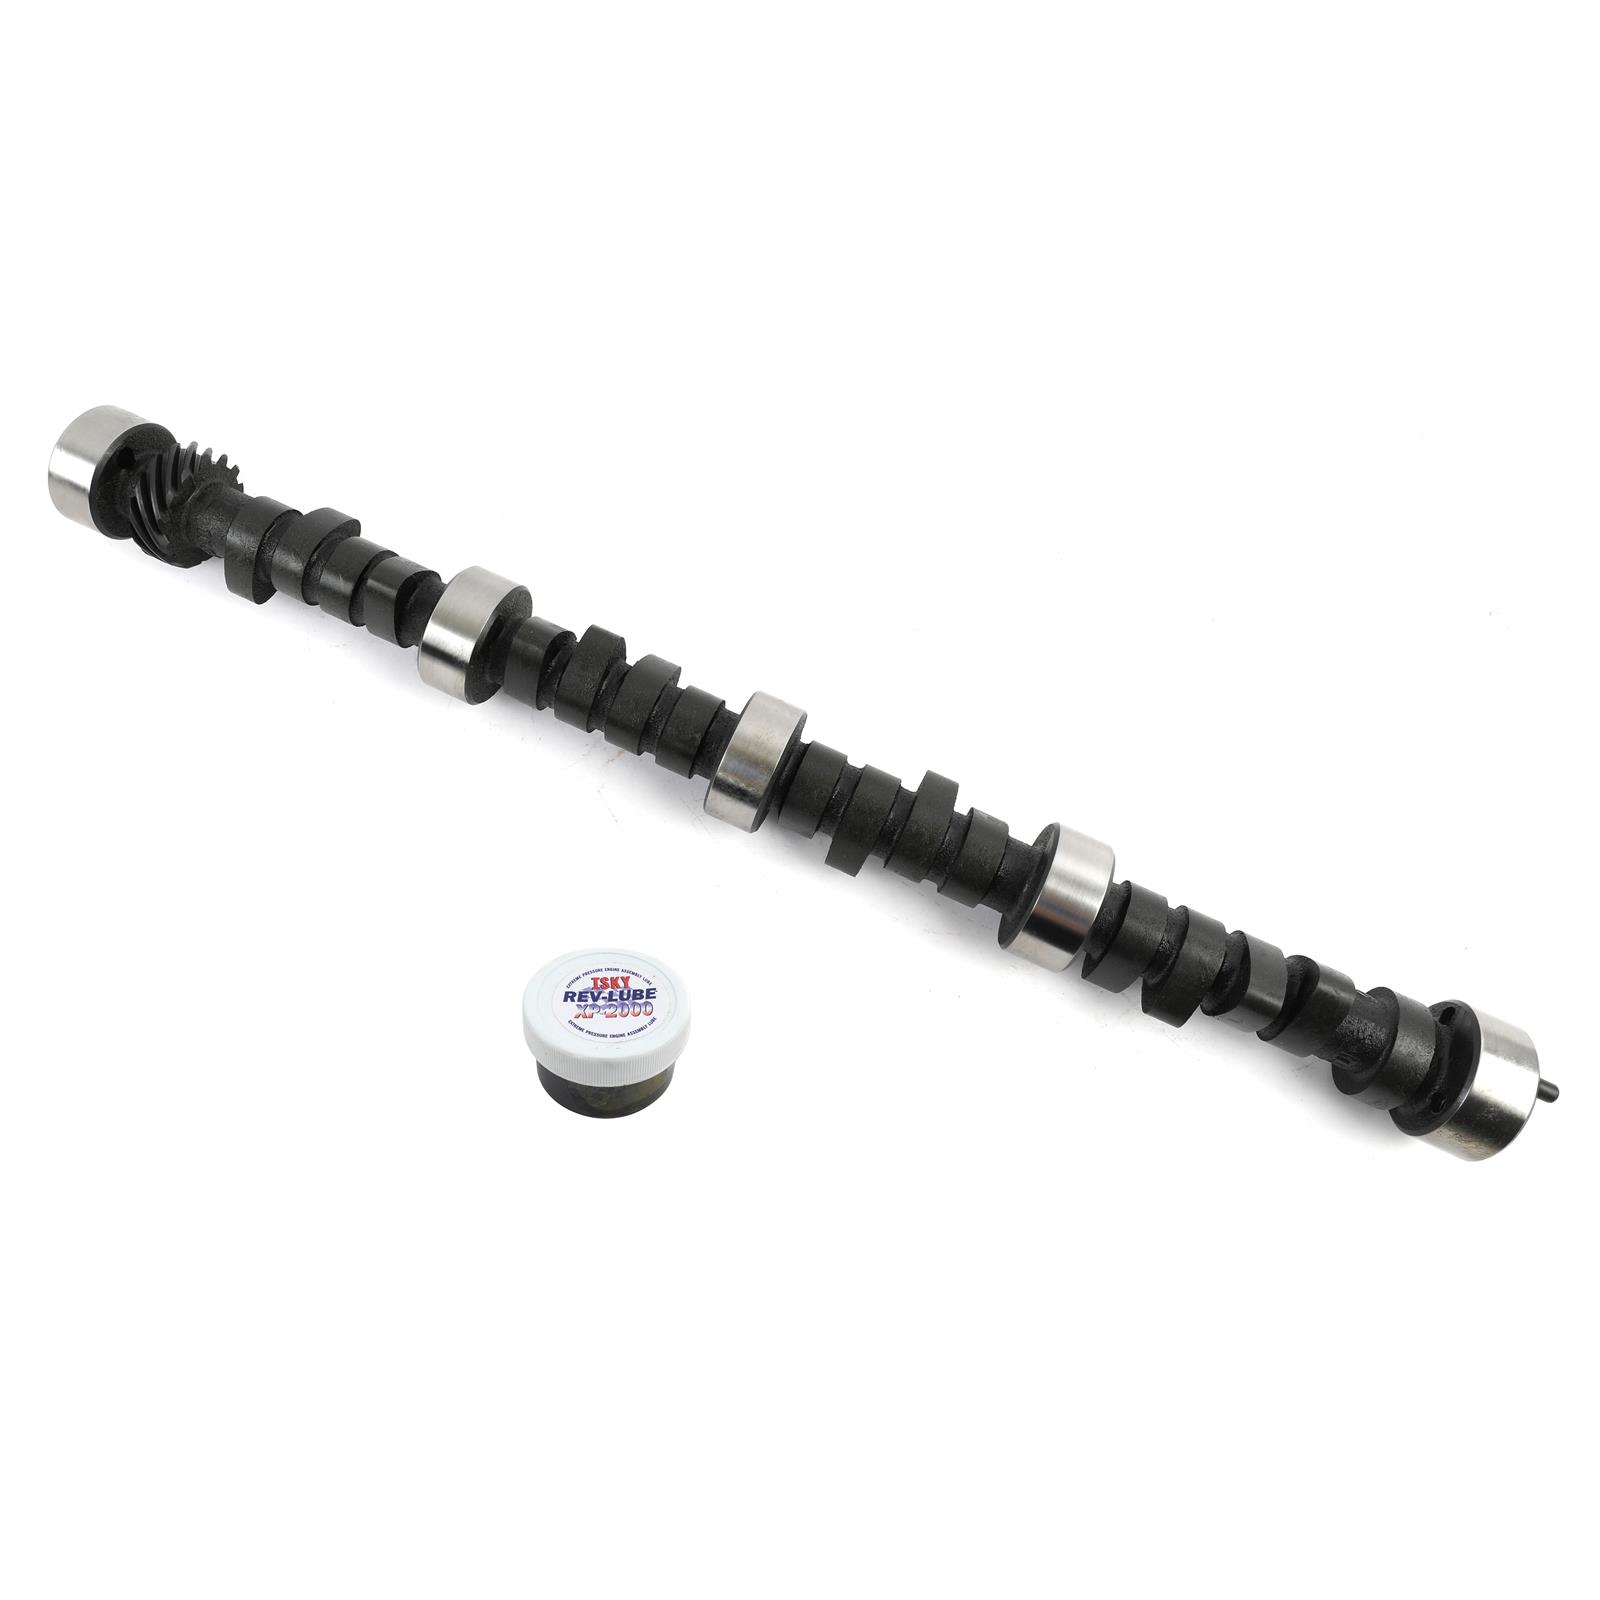 Isky Racing Cams 201281-6 Isky Oval Track Hydraulic Flat Tappet Camshafts |  Summit Racing